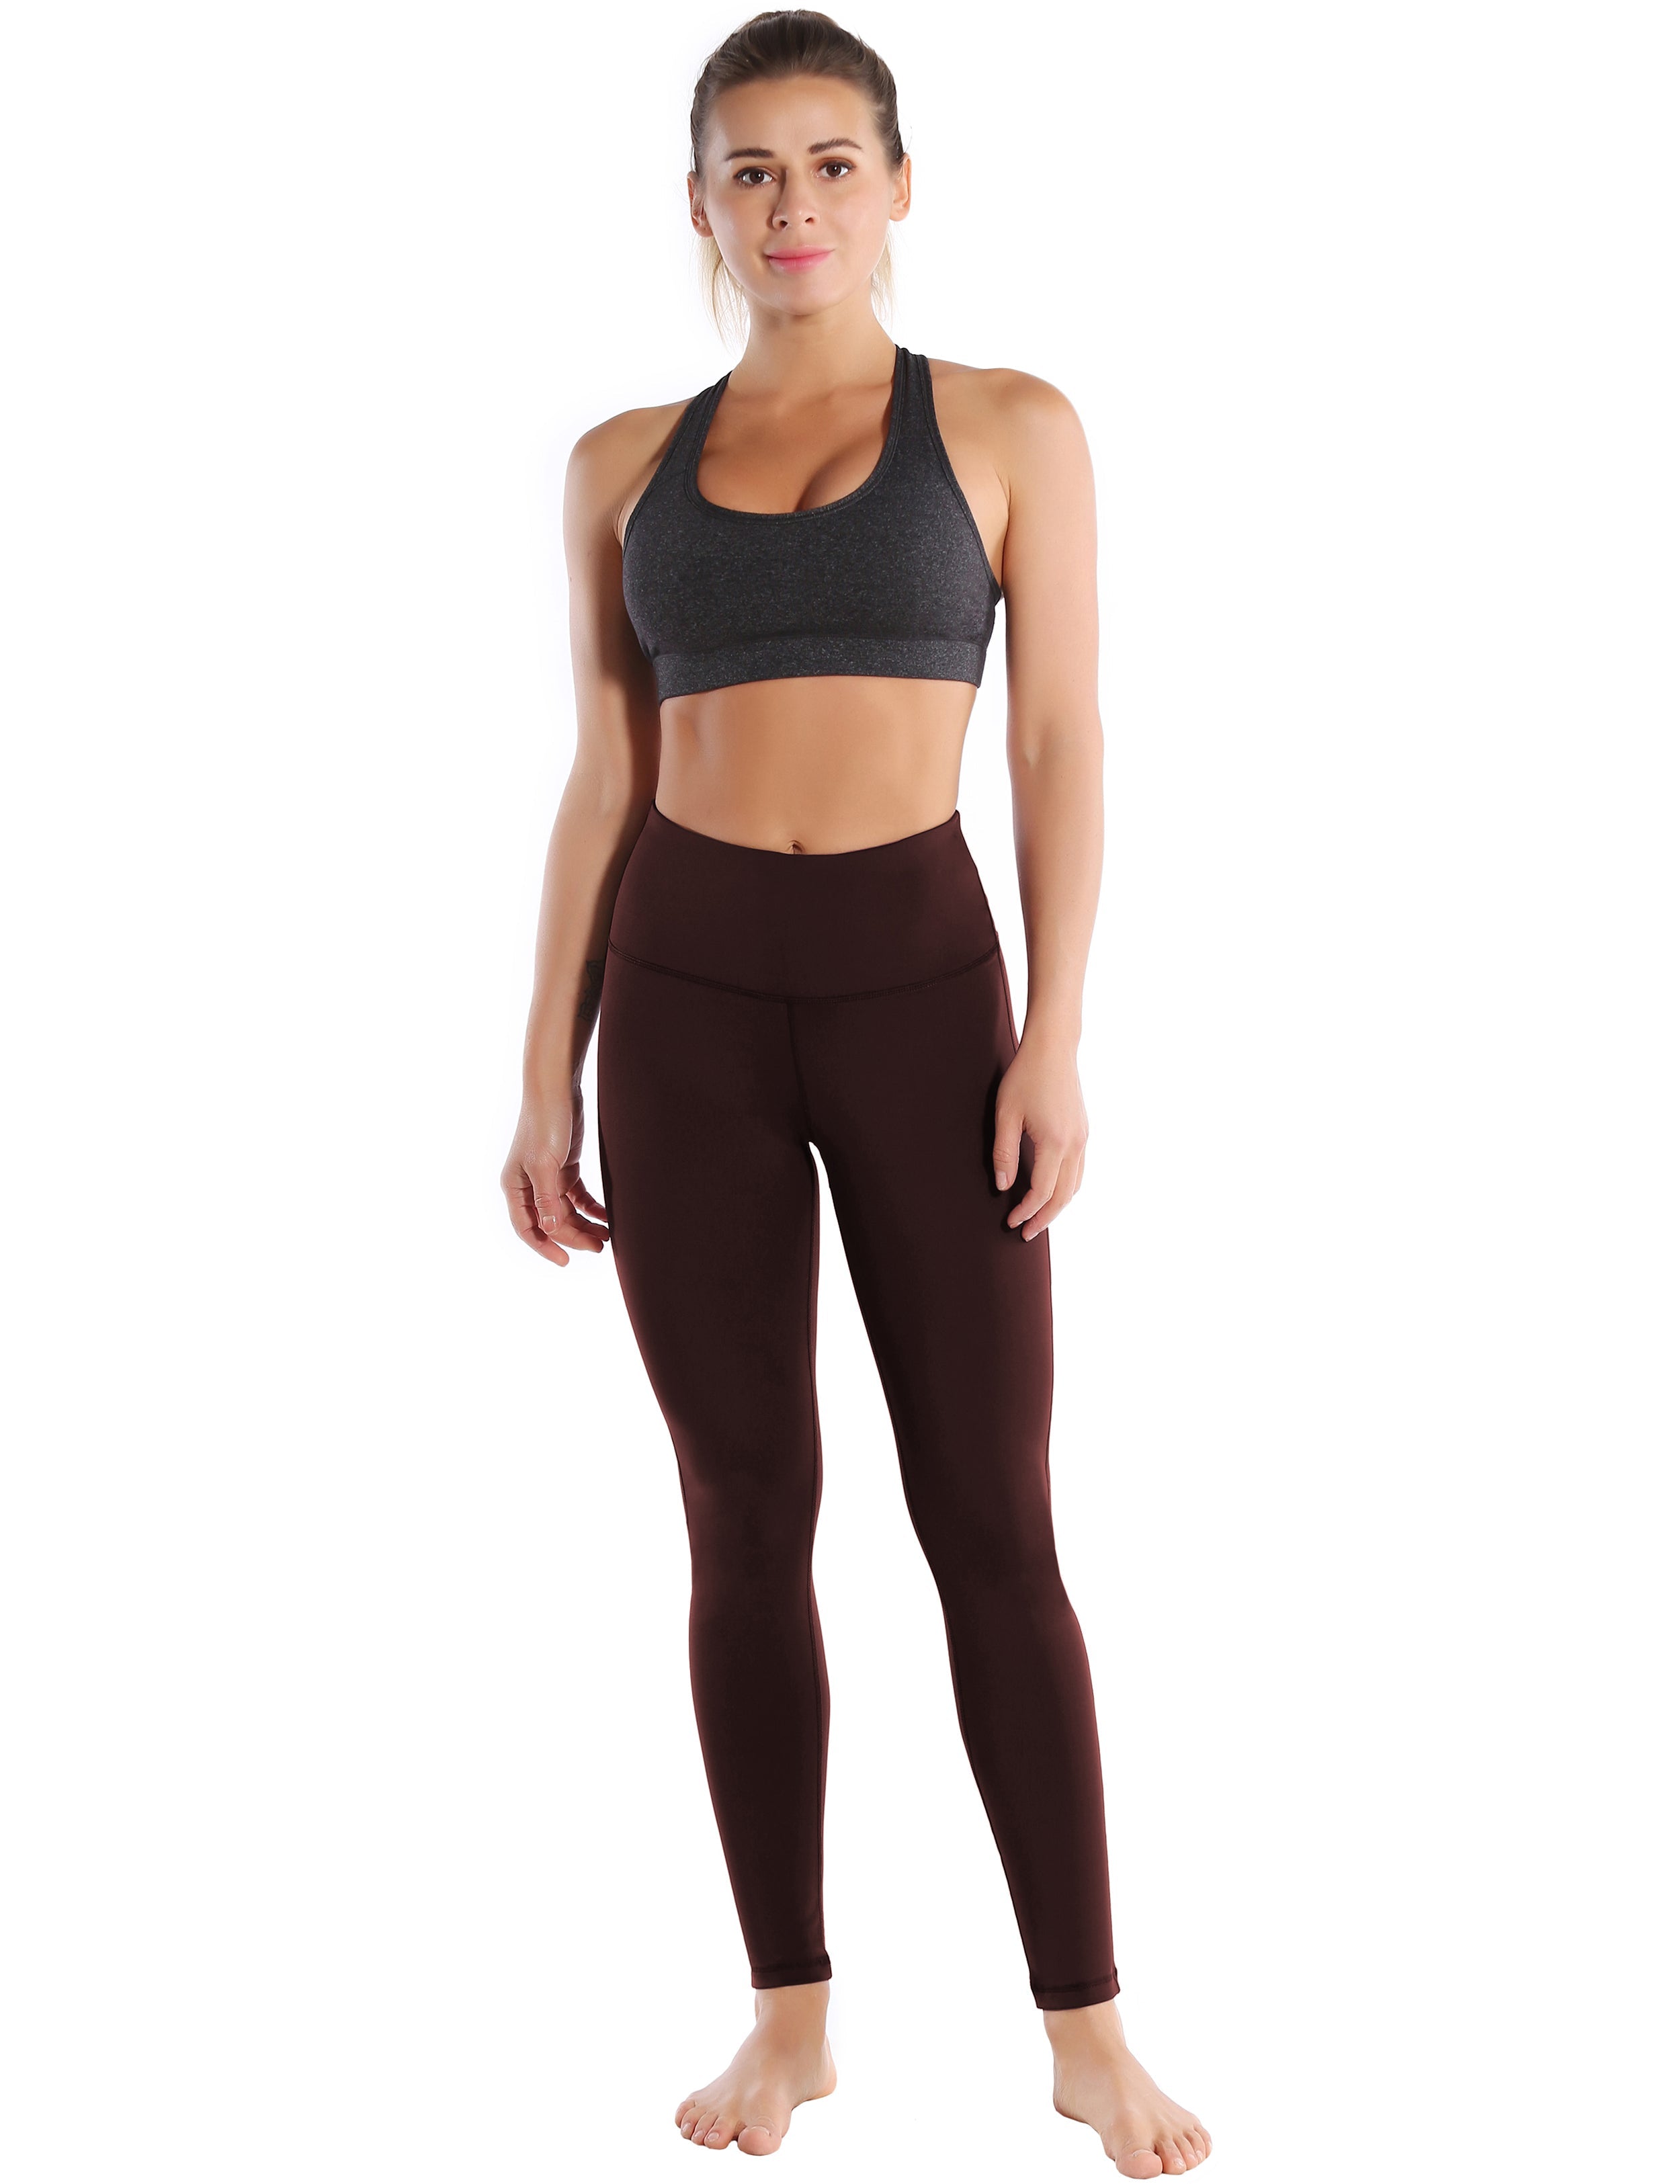 High Waist Side Line Biking Pants mahoganymaroon Side Line is Make Your Legs Look Longer and Thinner 75%Nylon/25%Spandex Fabric doesn't attract lint easily 4-way stretch No see-through Moisture-wicking Tummy control Inner pocket Two lengths